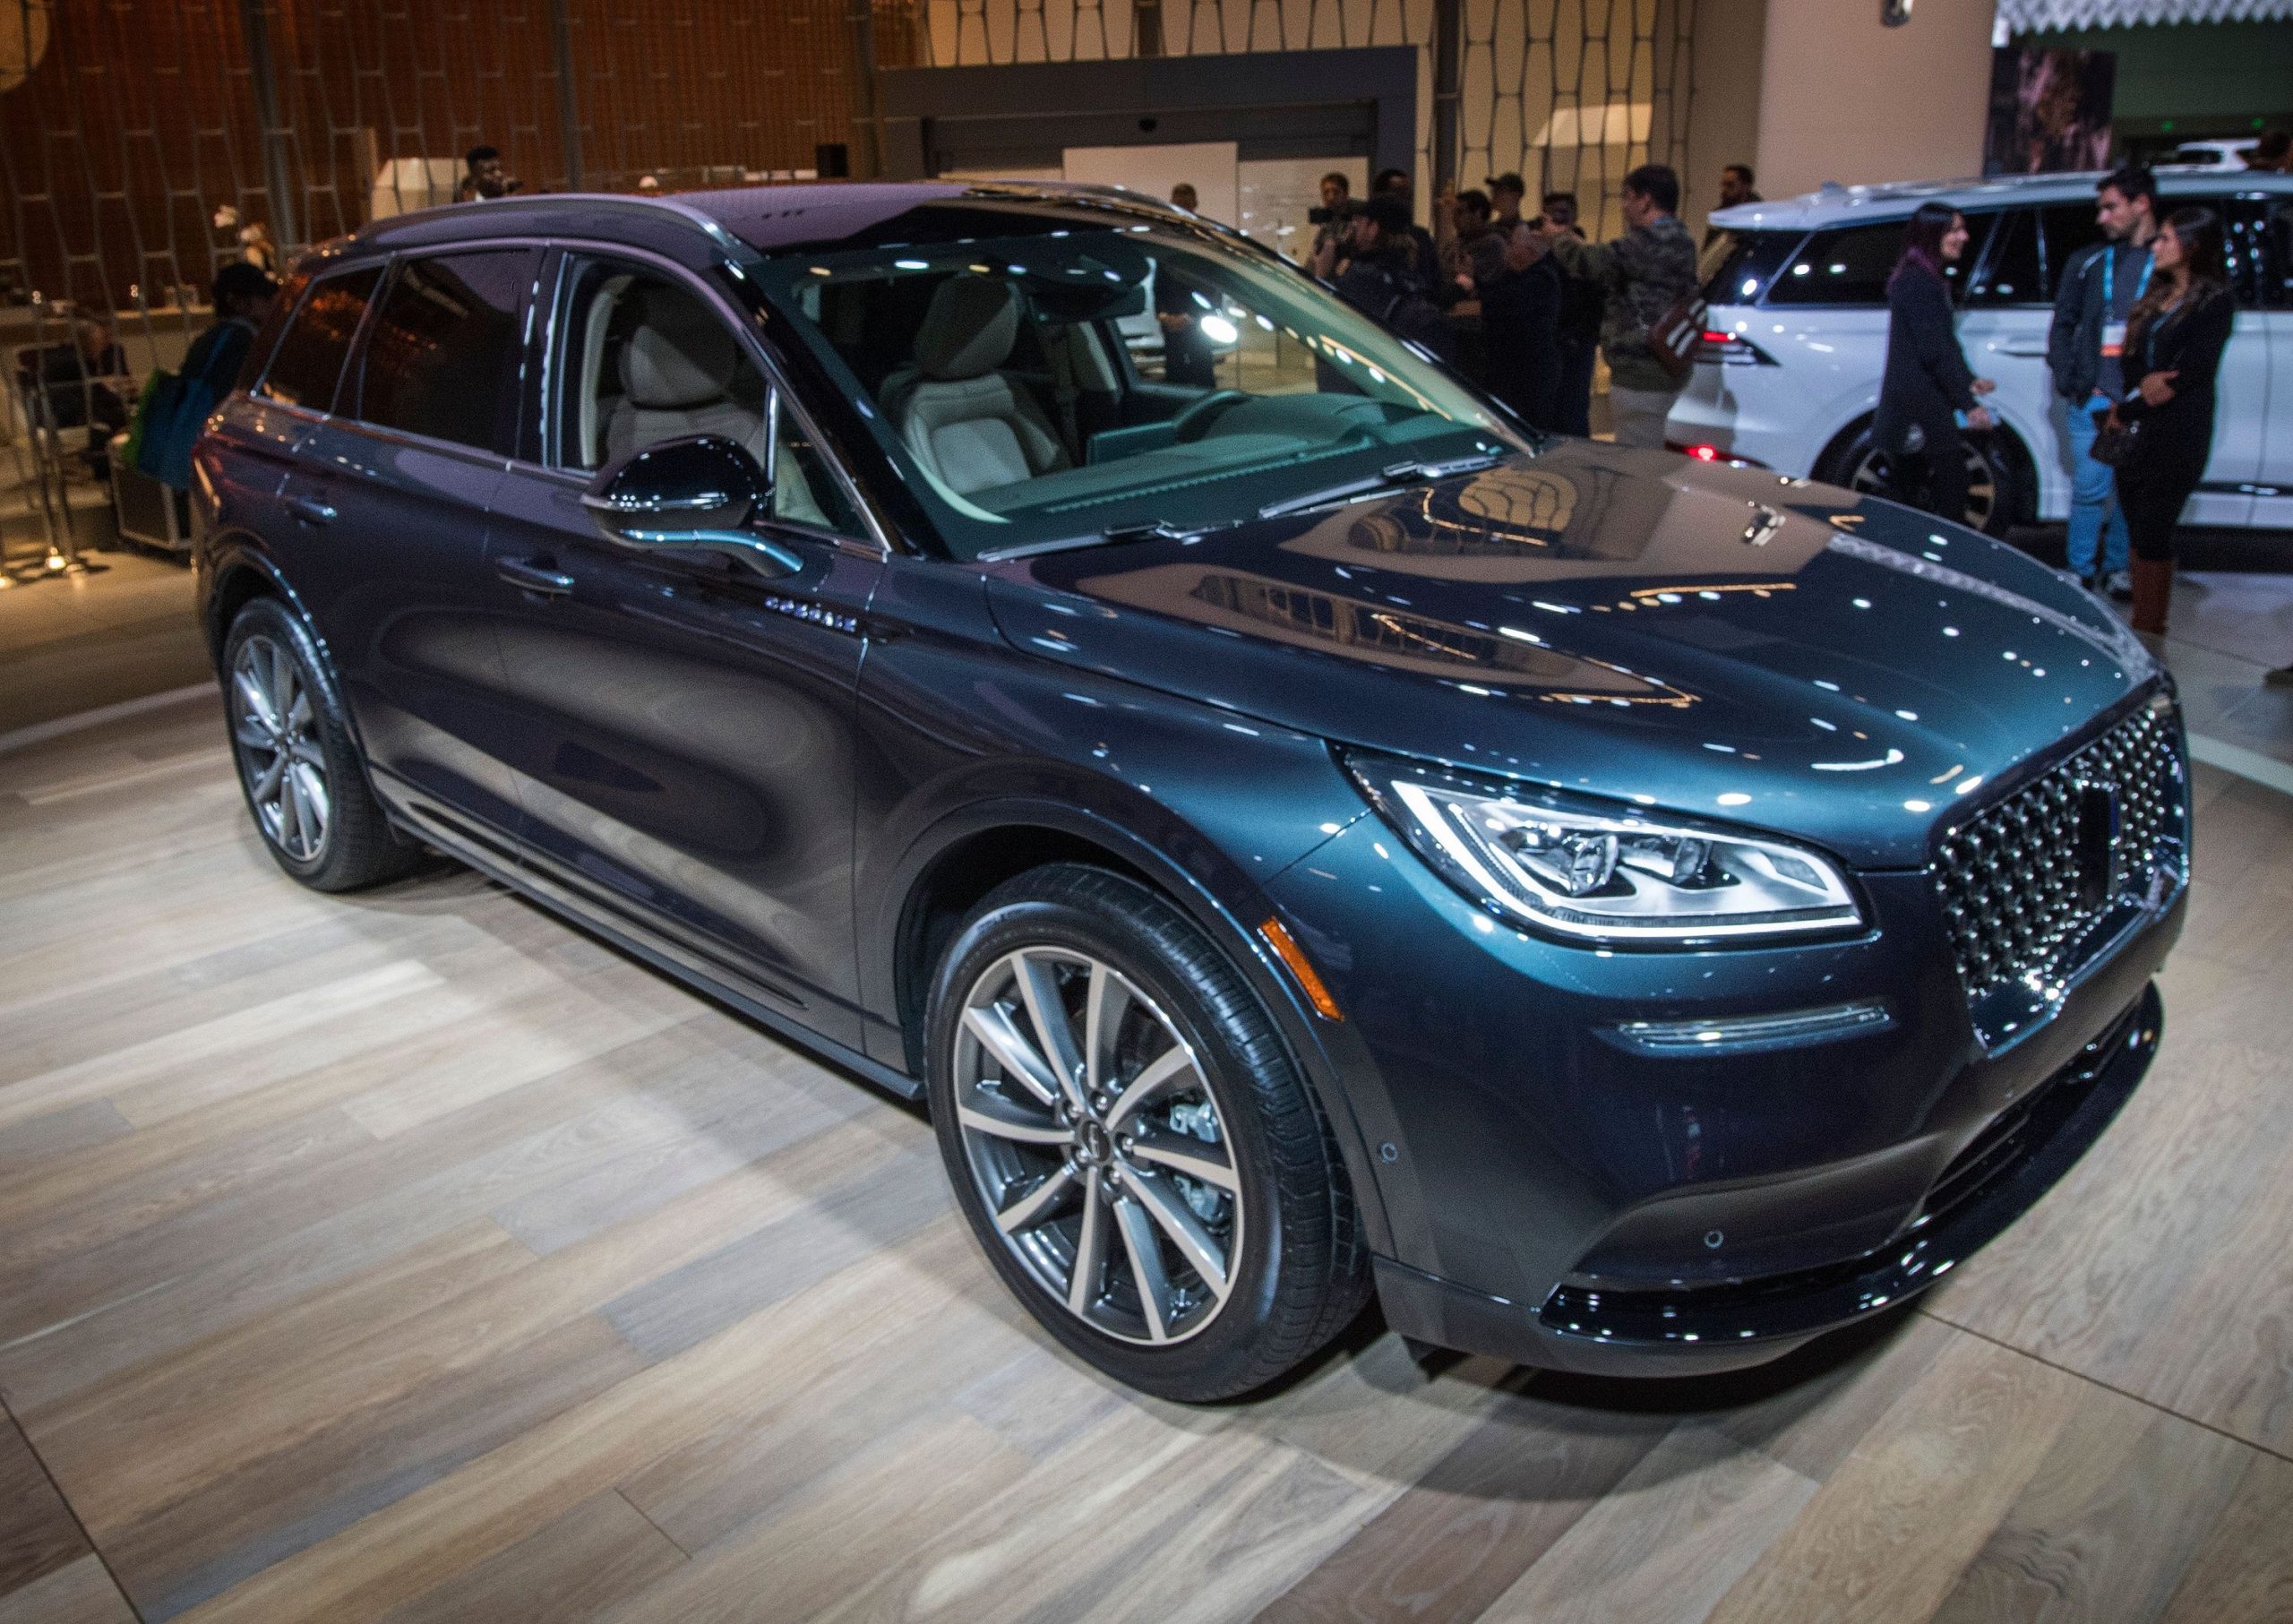 The blue 2020 Lincoln Corsair Grand Touring car on display at the 2019 Los Angeles Auto Show in Los Angeles, California